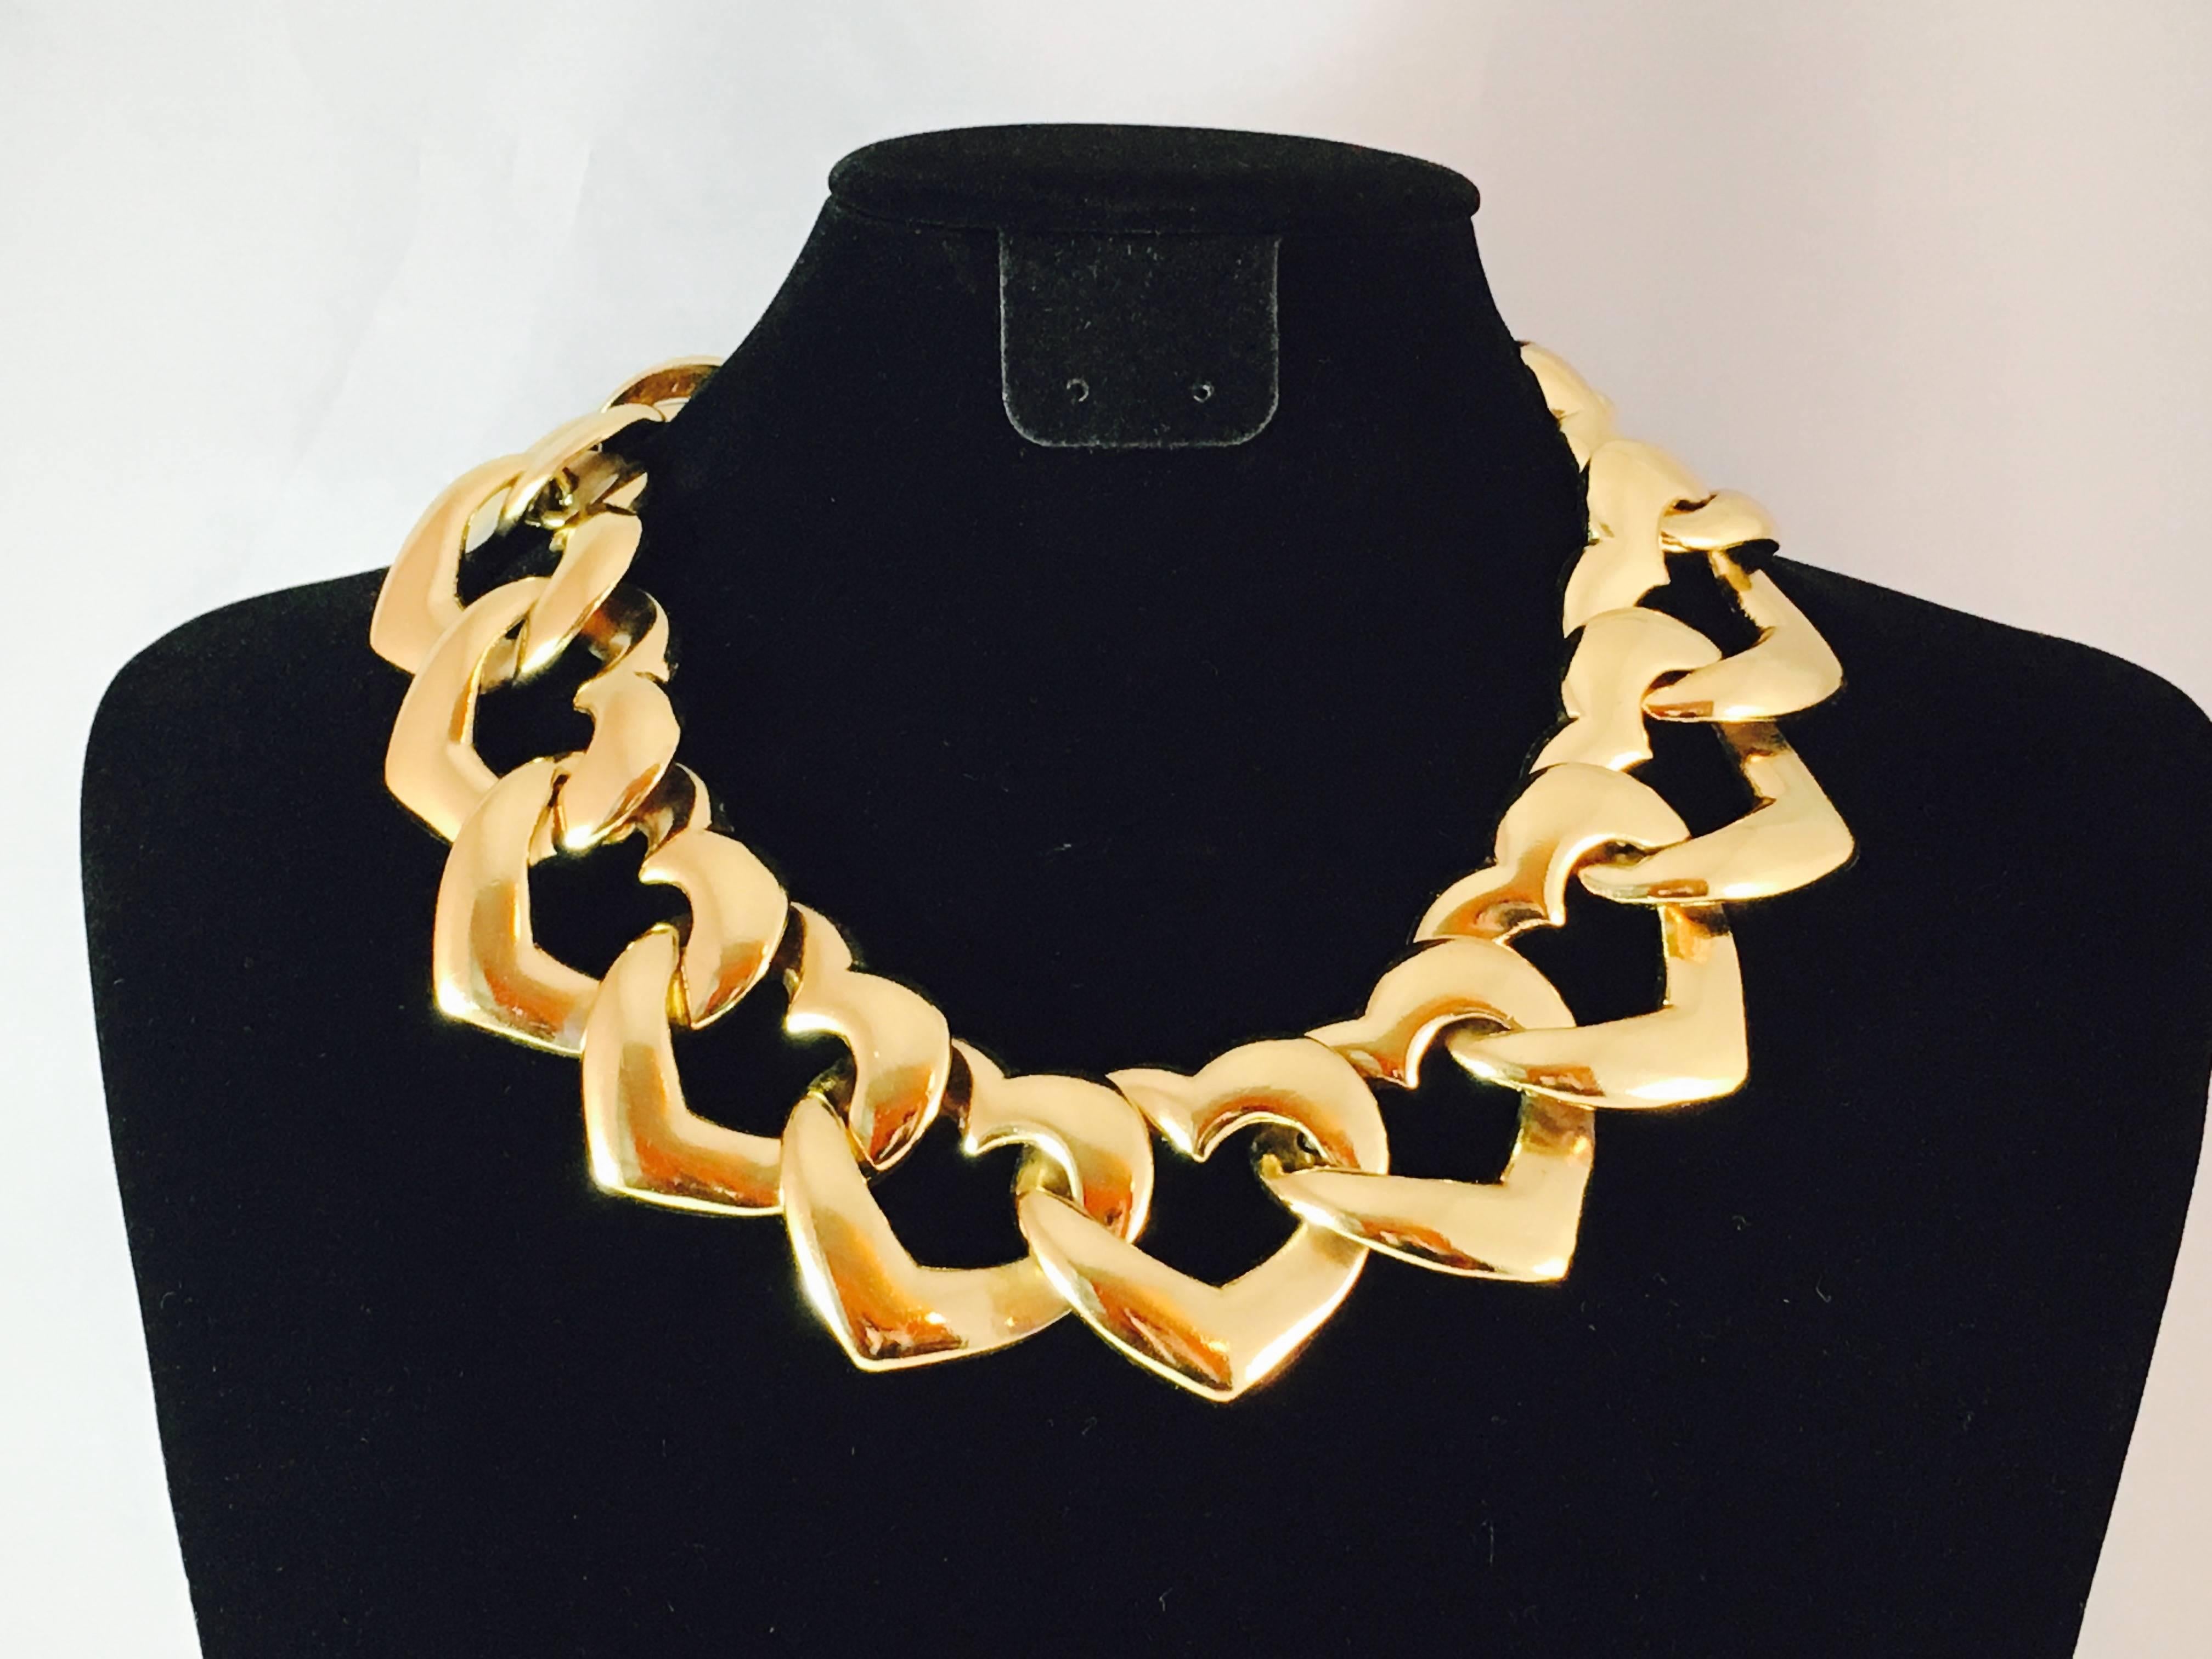 This is a vintage Yves Saint Laurent necklace made up of hearts. It is 1 1/2 inches wide. It is adjustable and can be worn at 16 inches or up to 18 inches. It is marked 'YSL' on a hanging plaque attached at the closure. The other side of the plaque